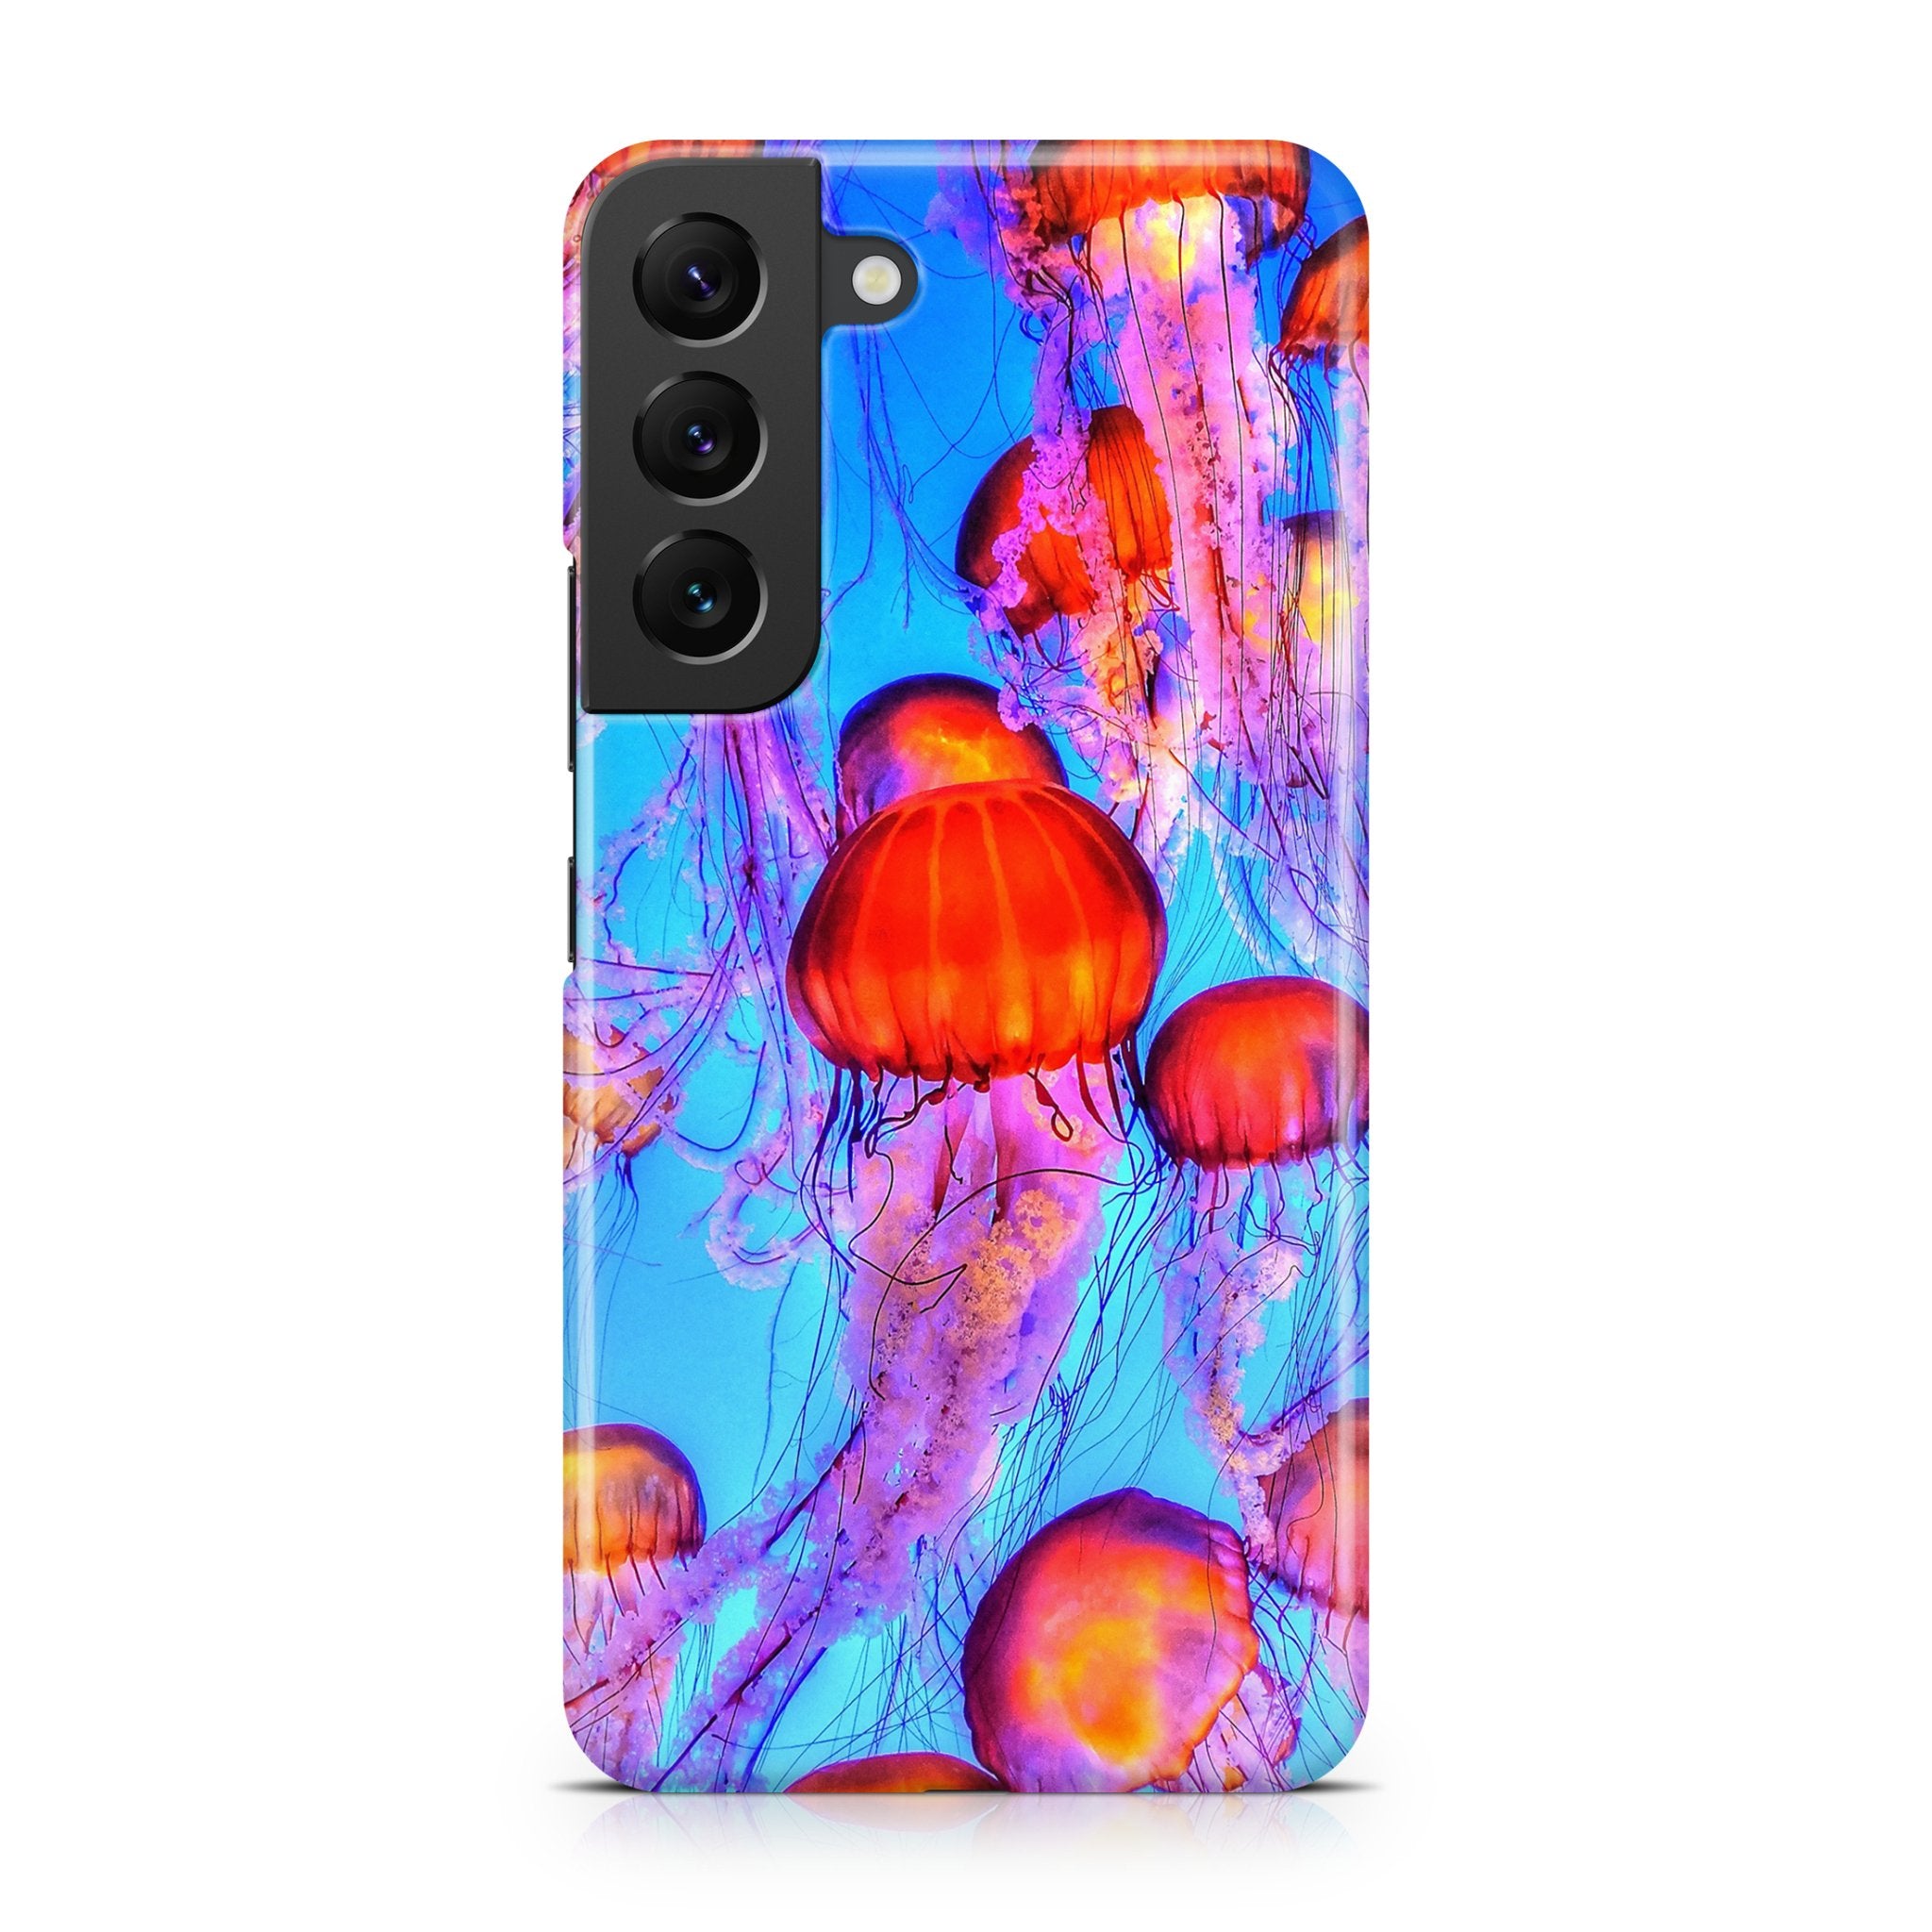 Jellyfish - Samsung phone case designs by CaseSwagger